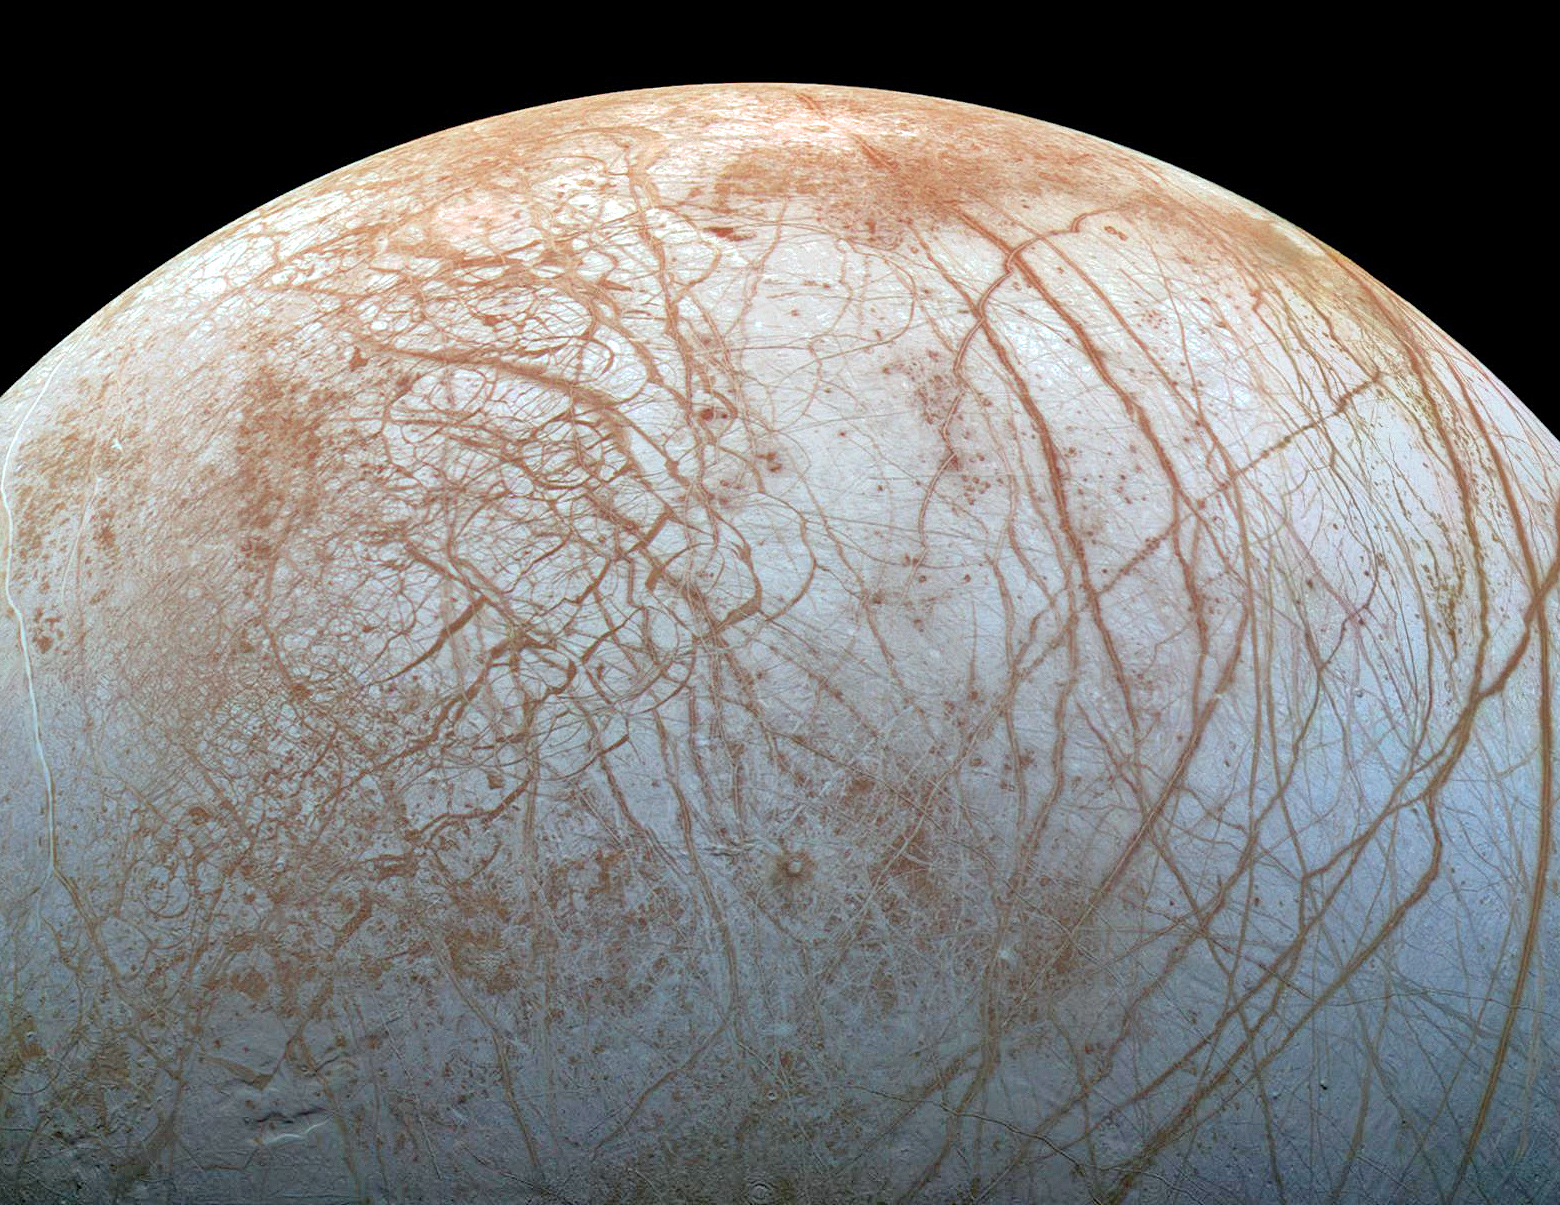 Europa’s oxygen levels are actually really bad